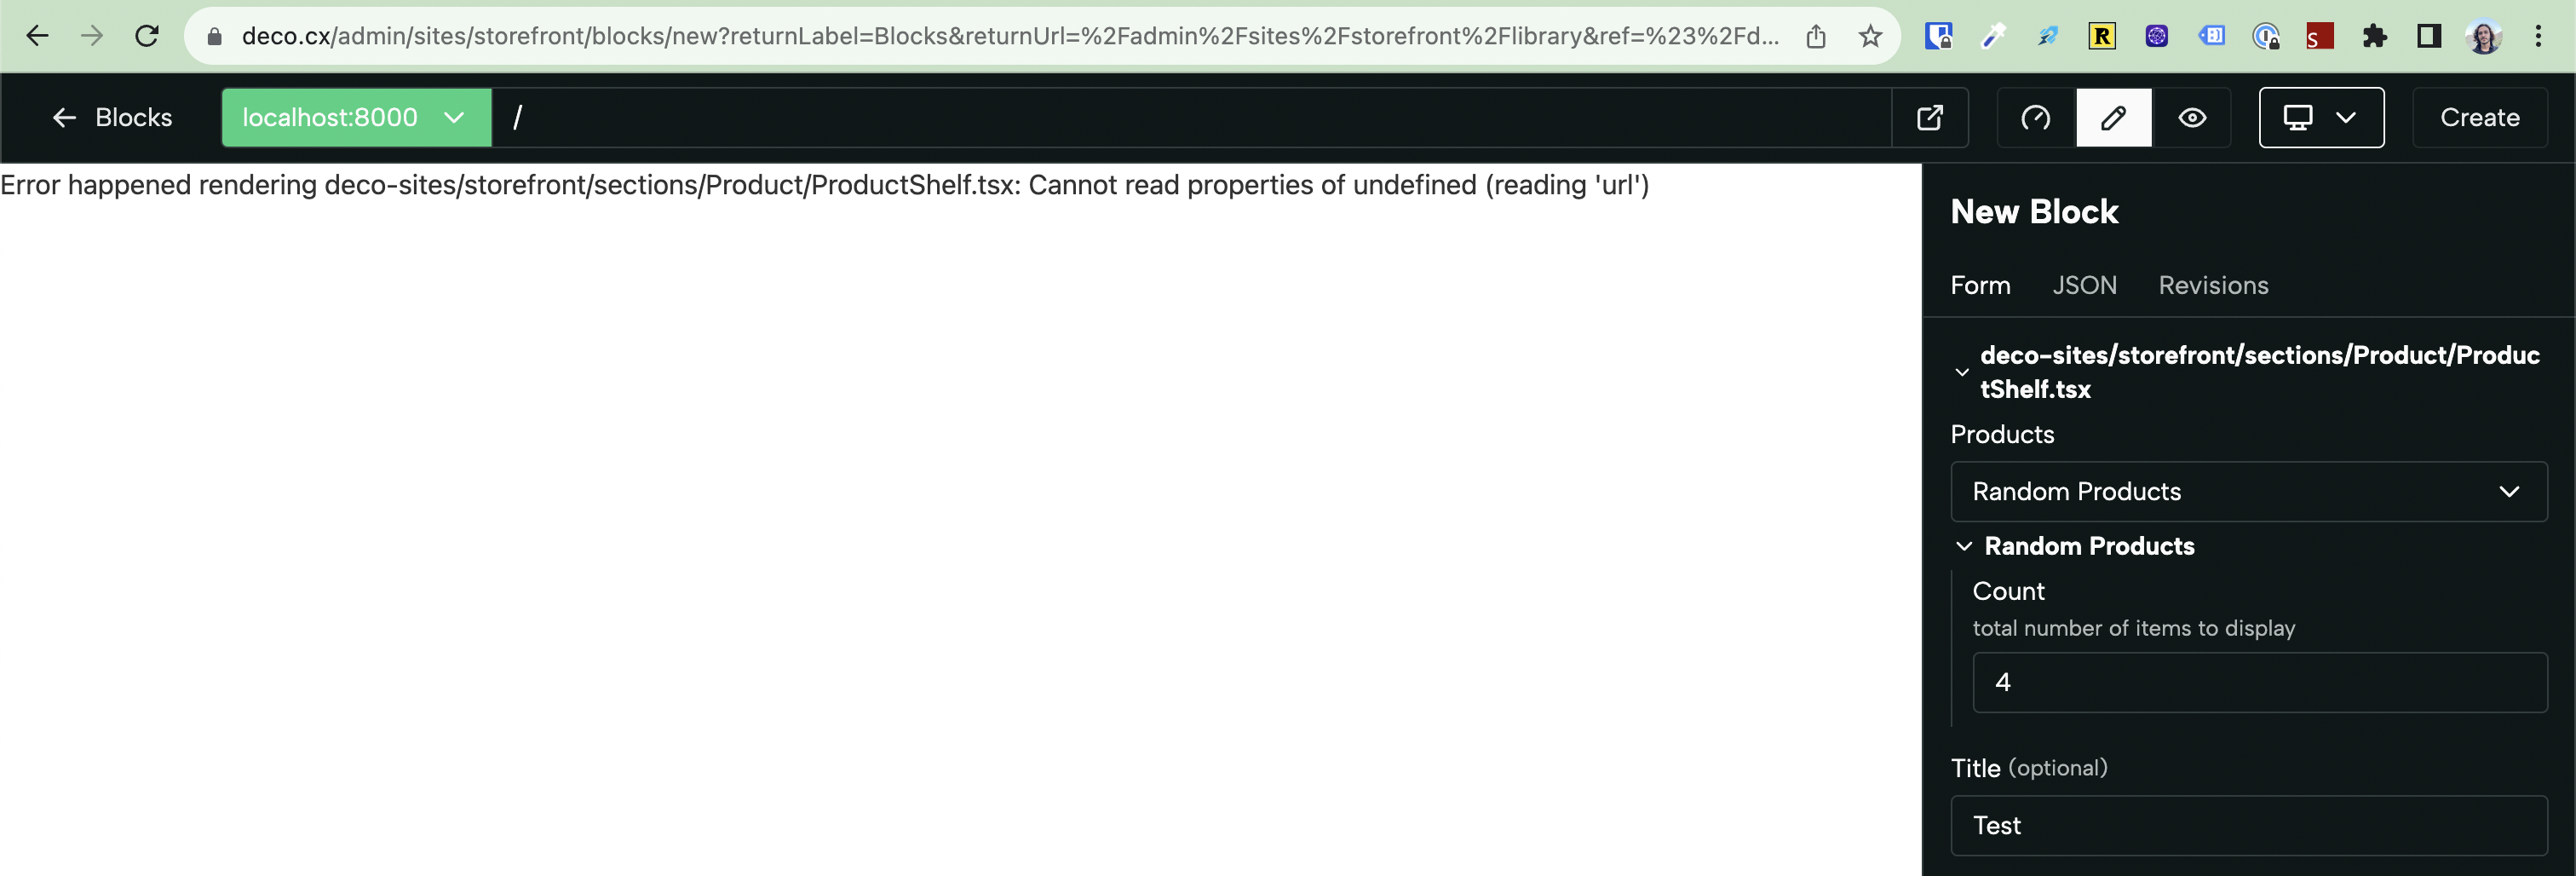 Error Cannot read properties of undefined (reading 'url') previewing a Product Shelf